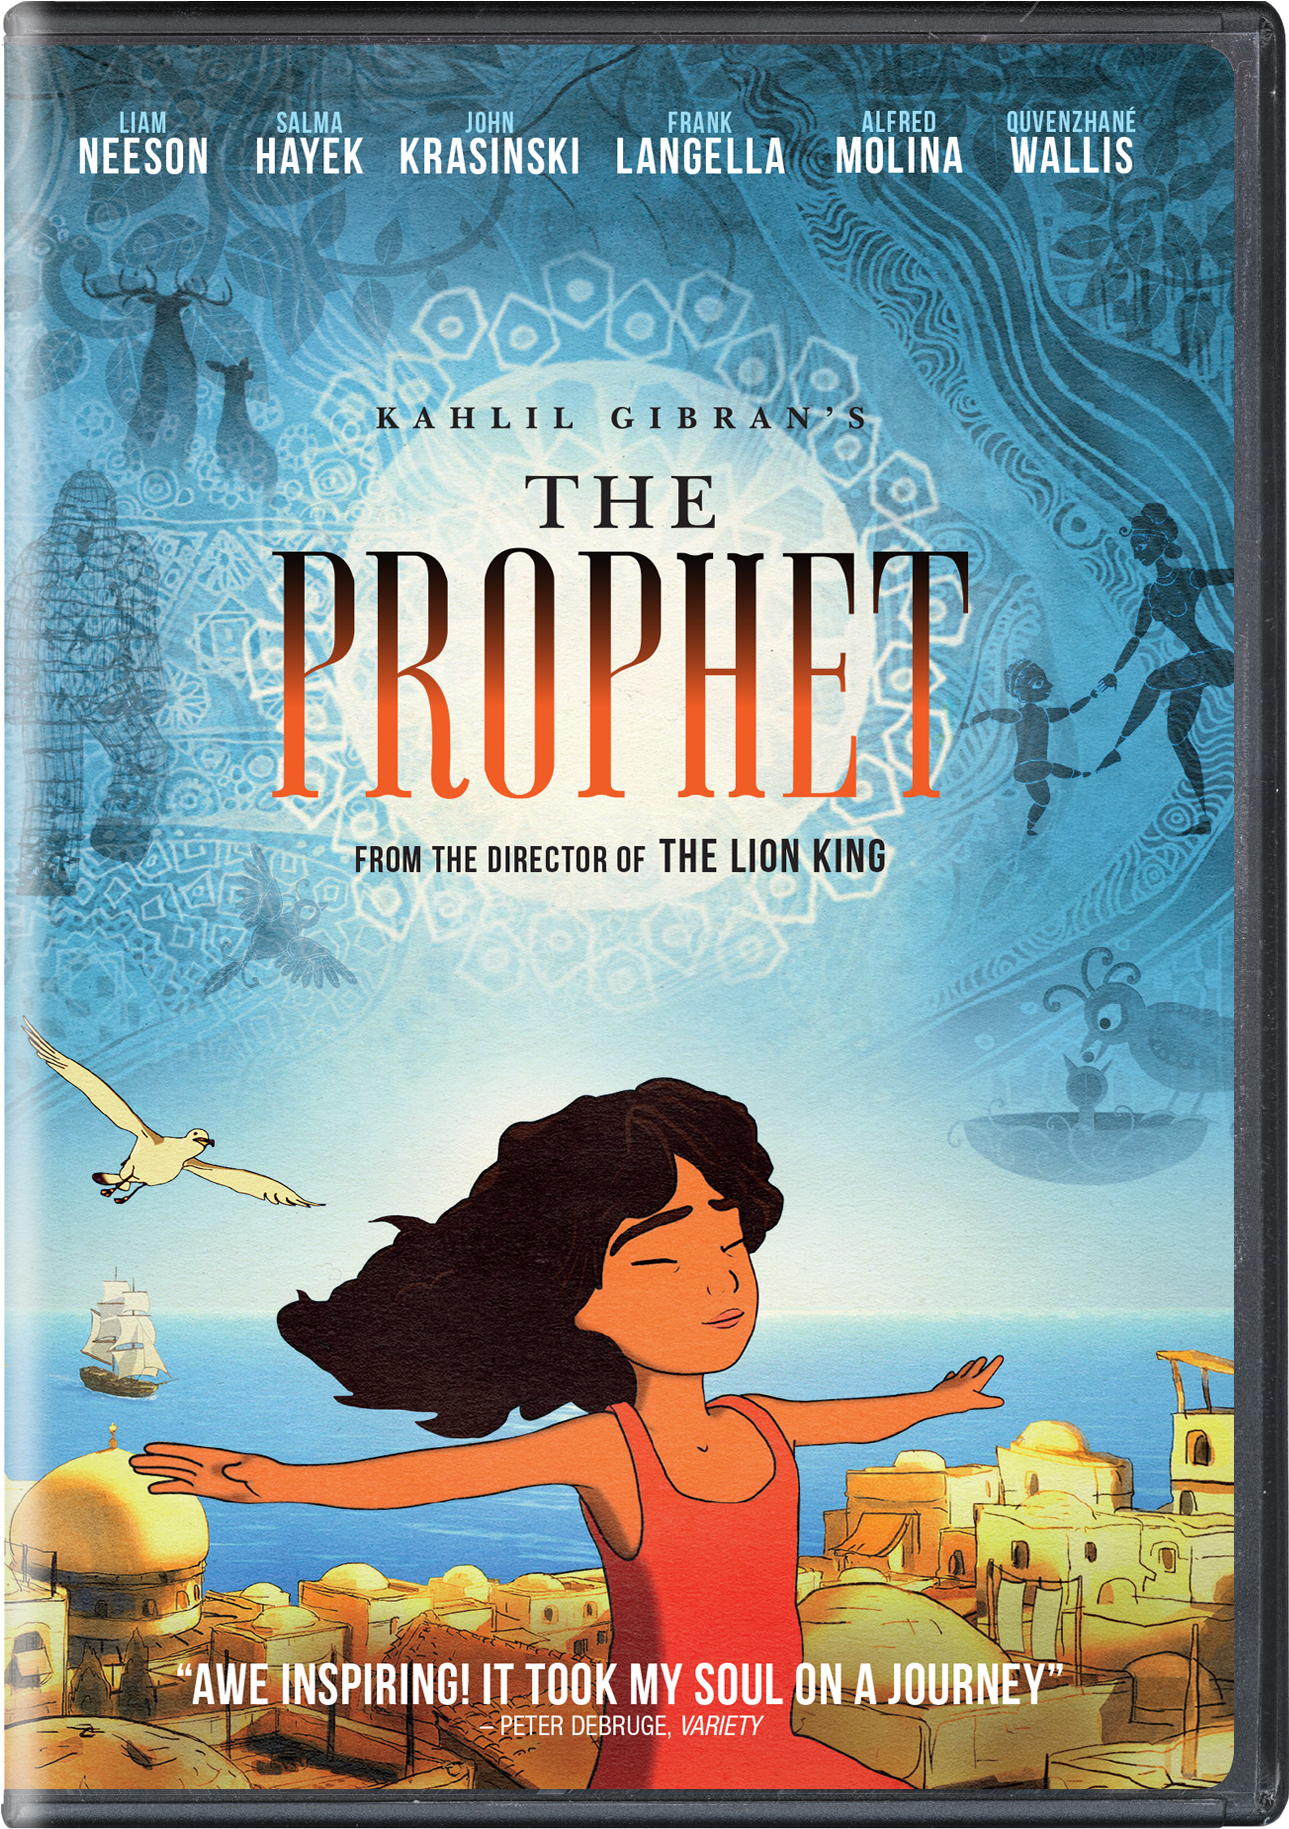 Kahlil Gibran's The Prophet - DVD [ 2015 ]  - Animation Movies On DVD - Movies On GRUV